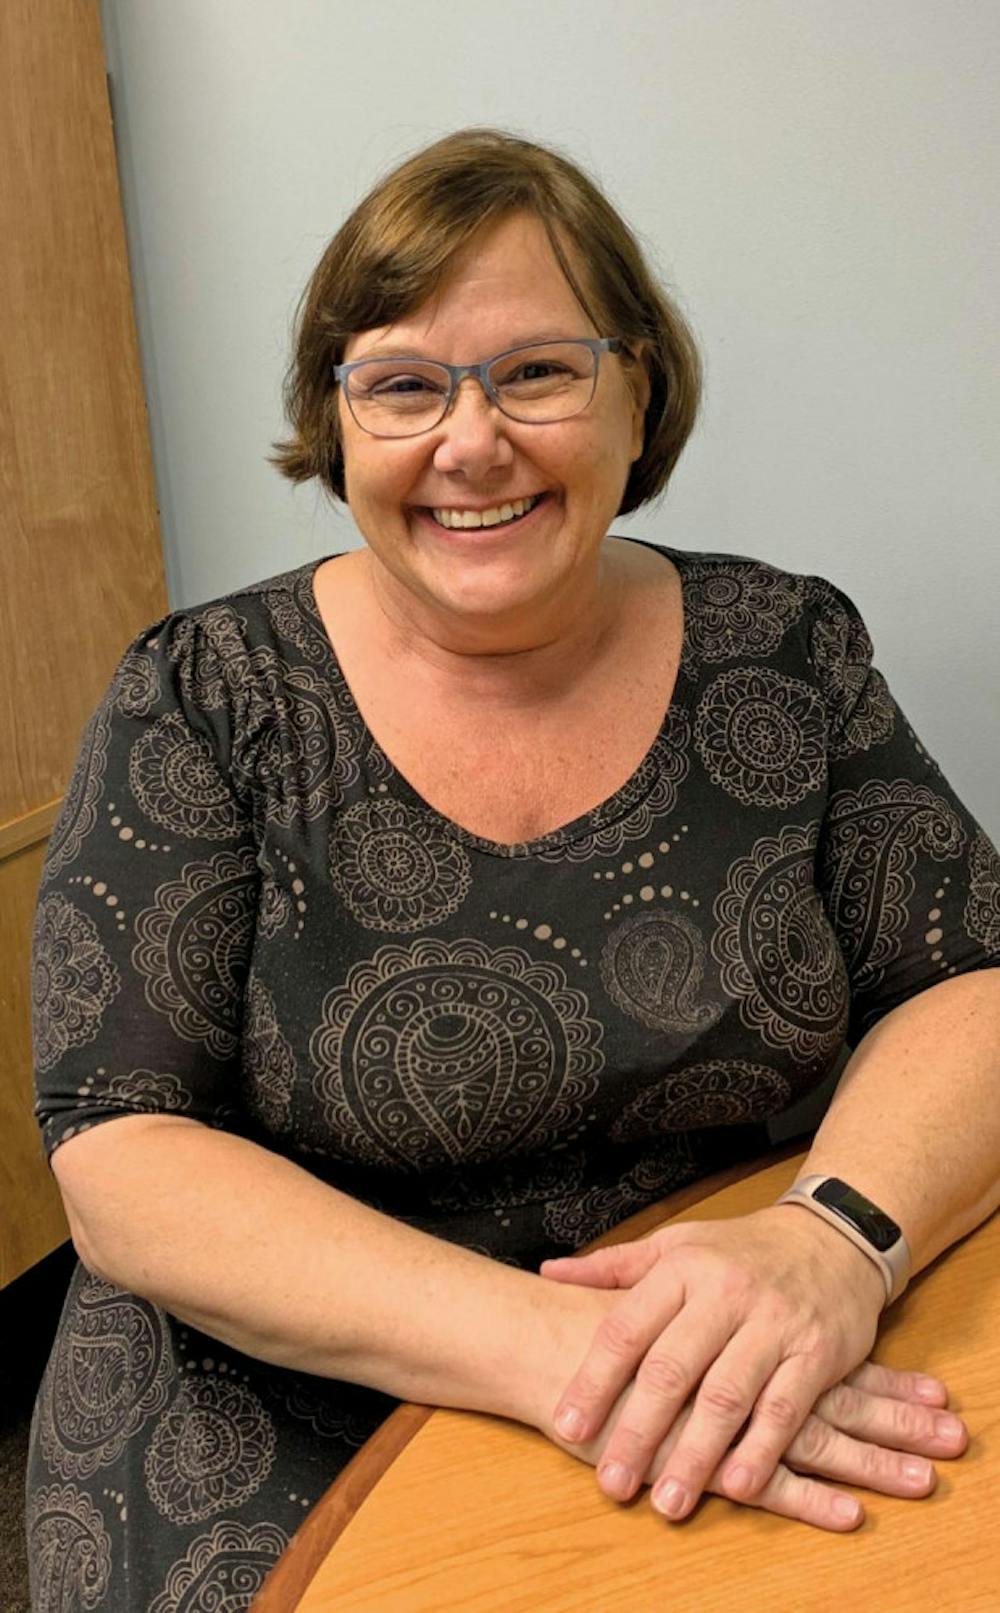 <span class="photocreditinline">COURTESY PHOTO</span><br />Jean Stone, Executive Director of ACRJS, assumed leadership in December 2019. Since joining the organization, she has focused part of her work on garnering more volunteers.